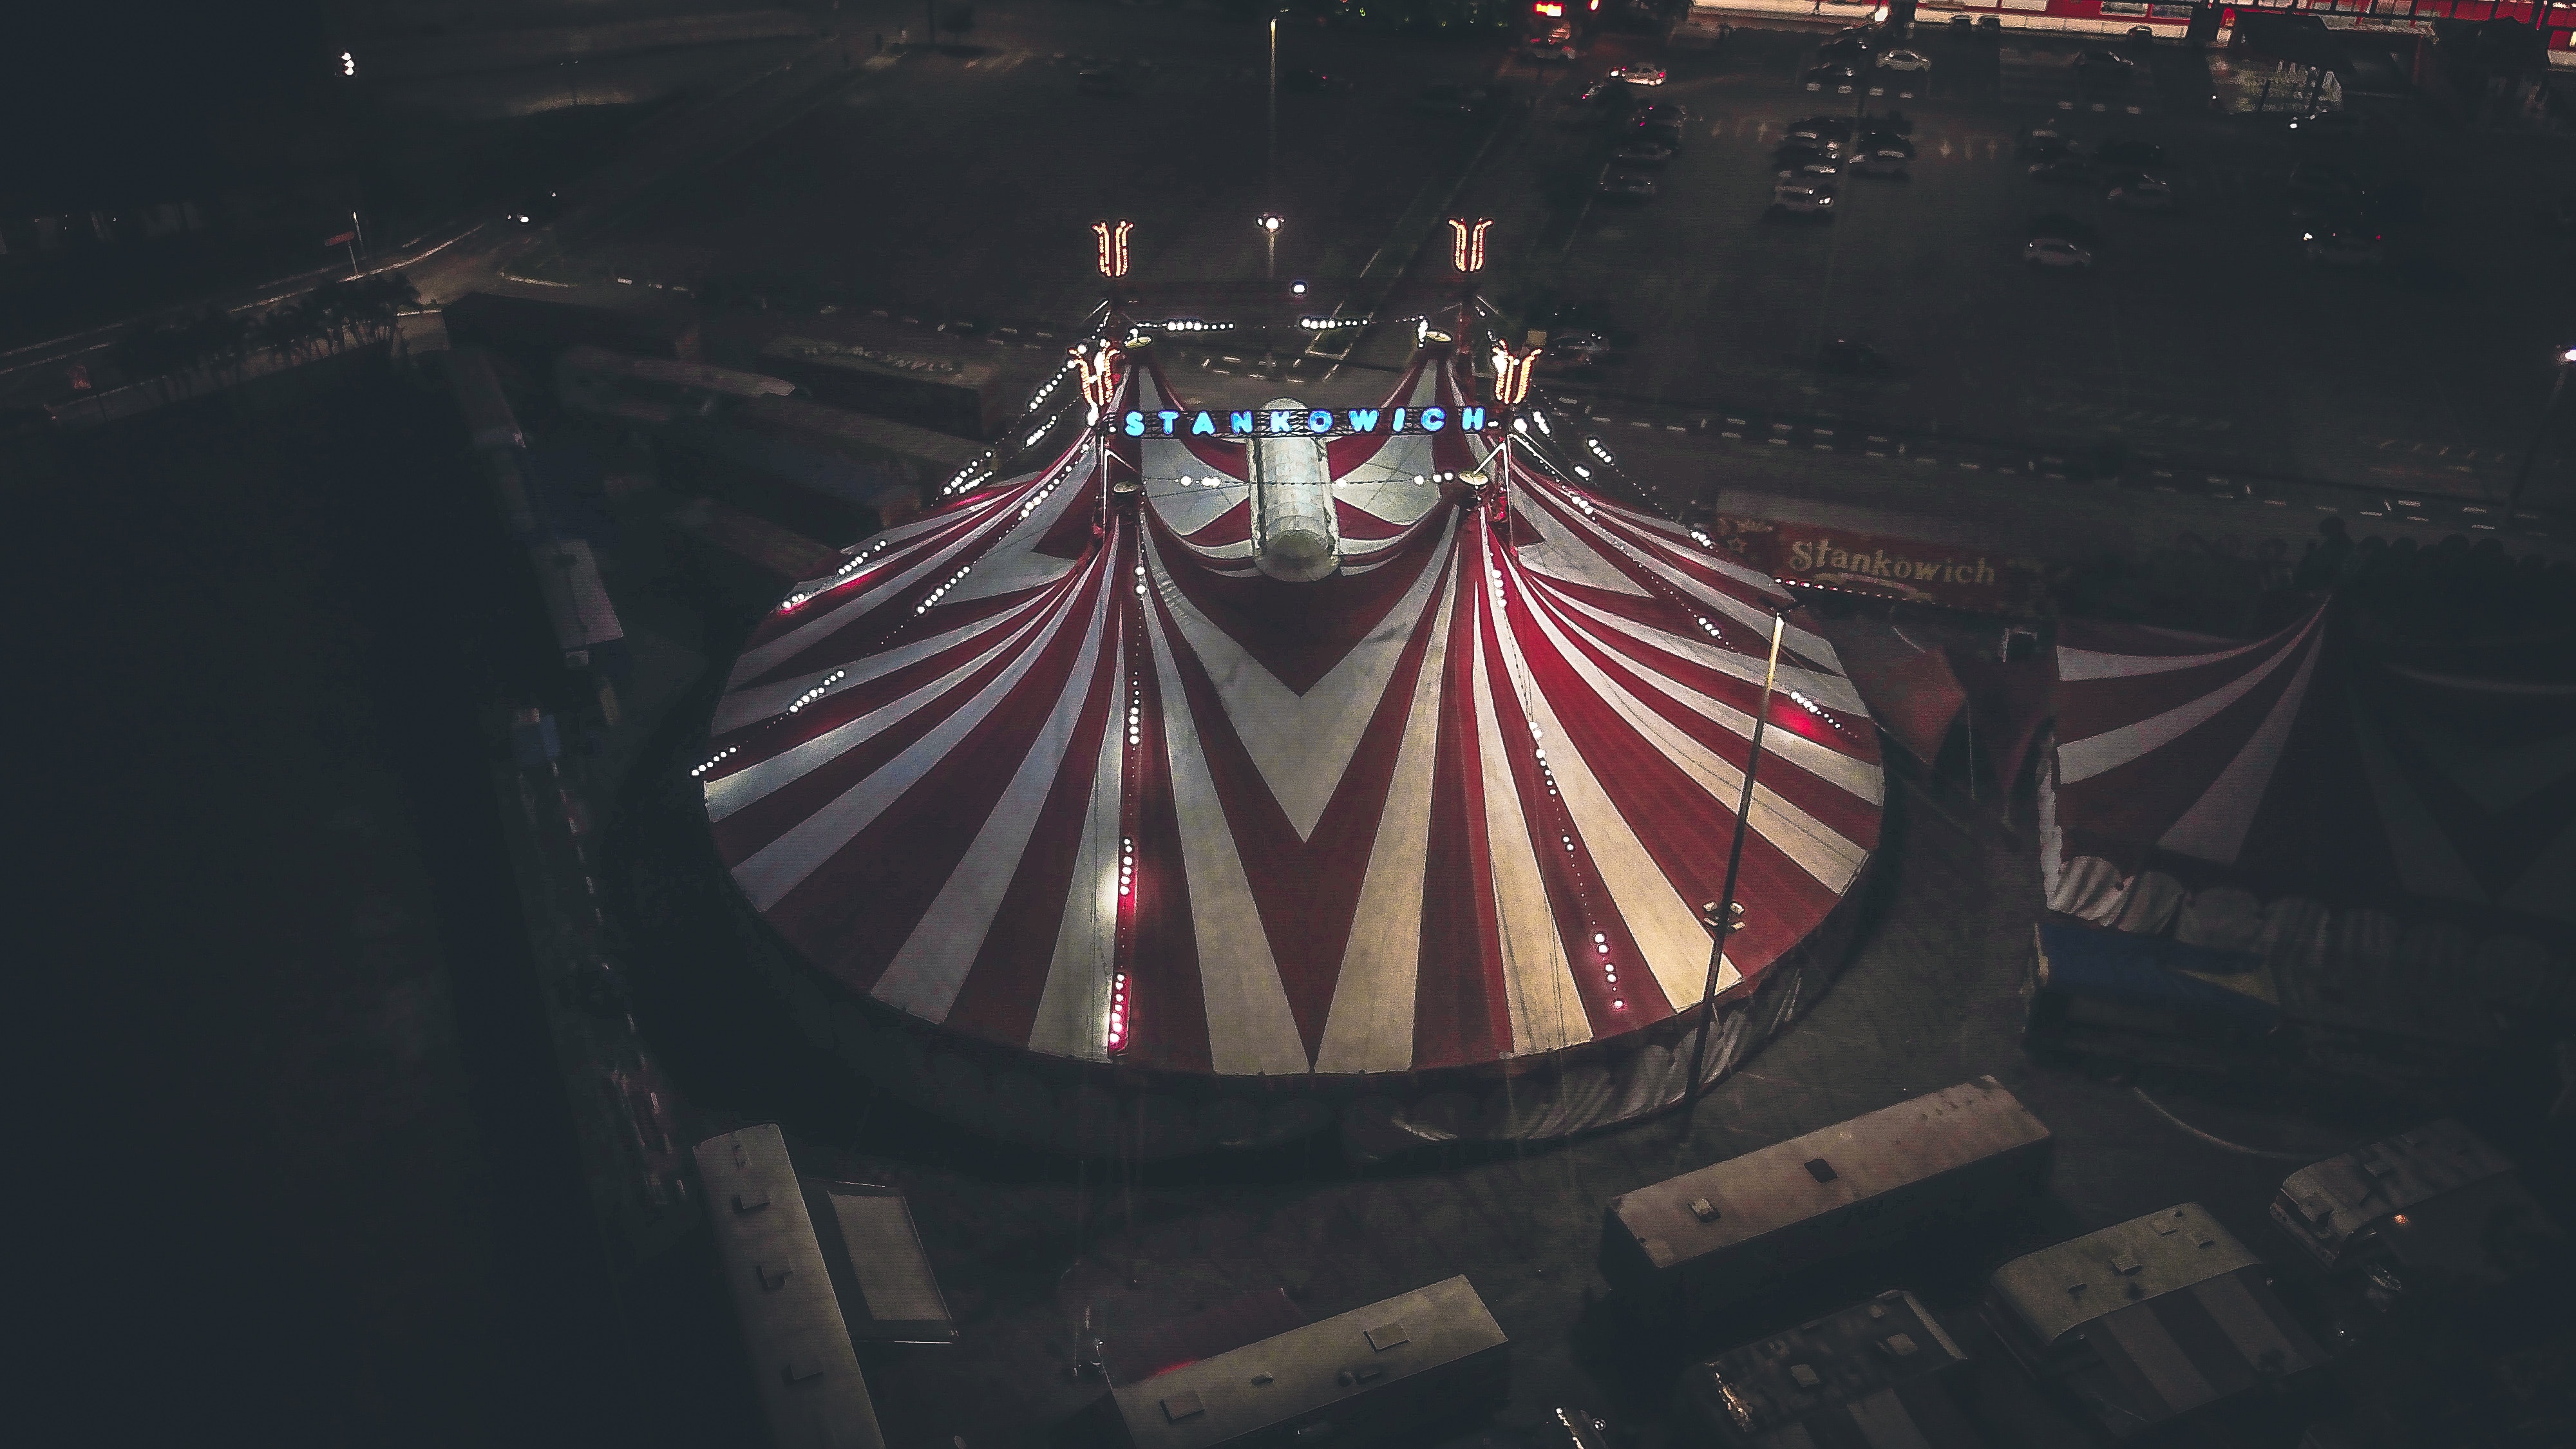 Best Free Circus Tent & Image · 100% Royalty Free HD Downloads